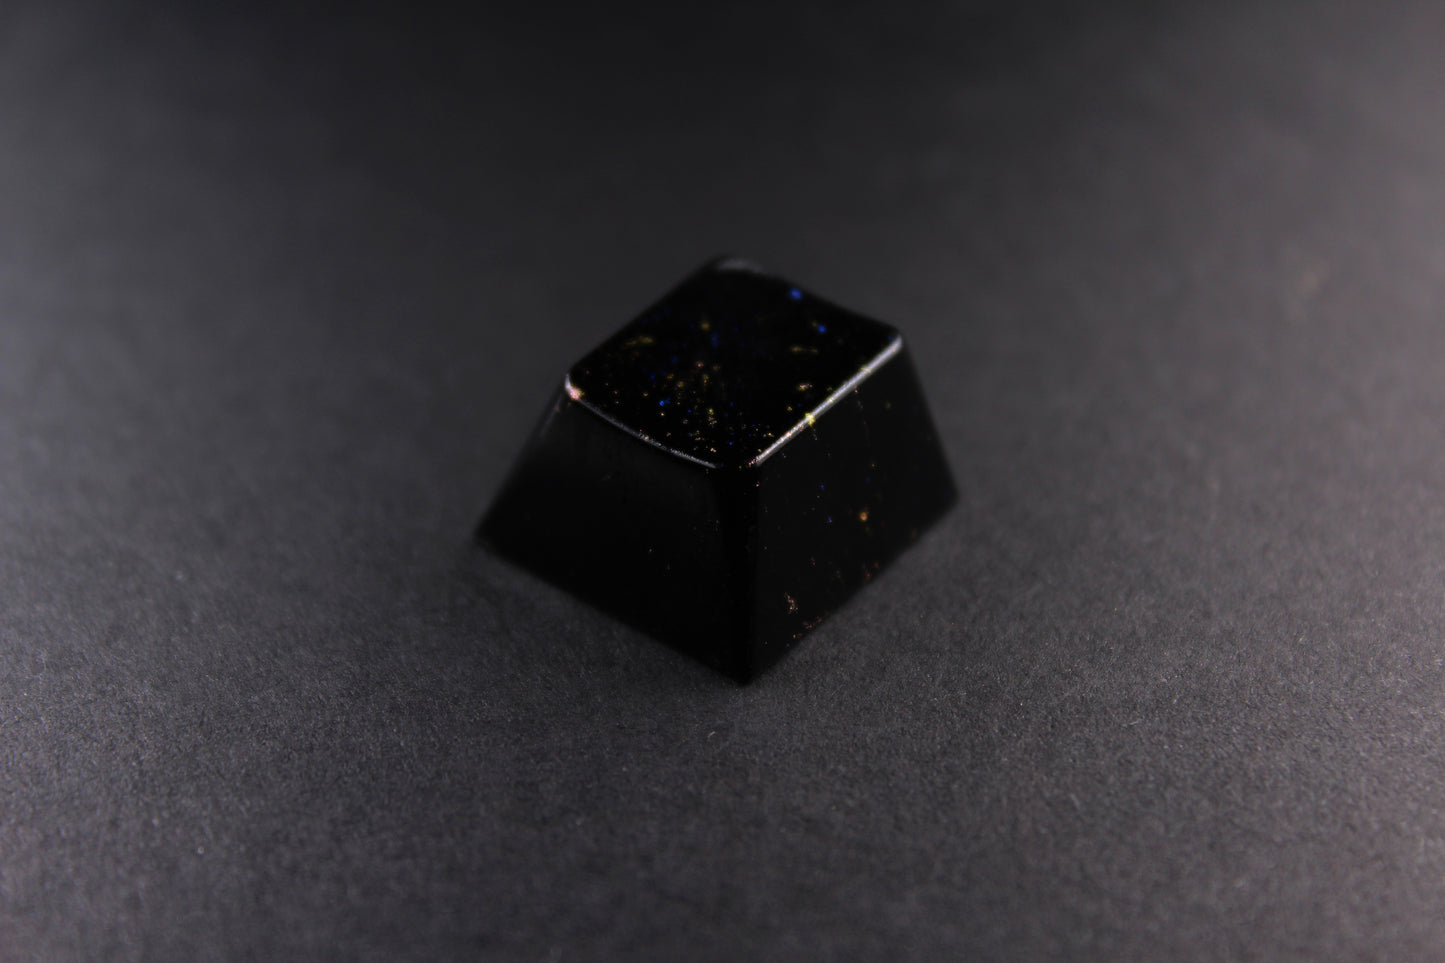 Cherry Esc - The void 2 - PrimeCaps Keycap - Blank and Sculpted Artisan Keycaps for cherry MX mechanical keyboards 